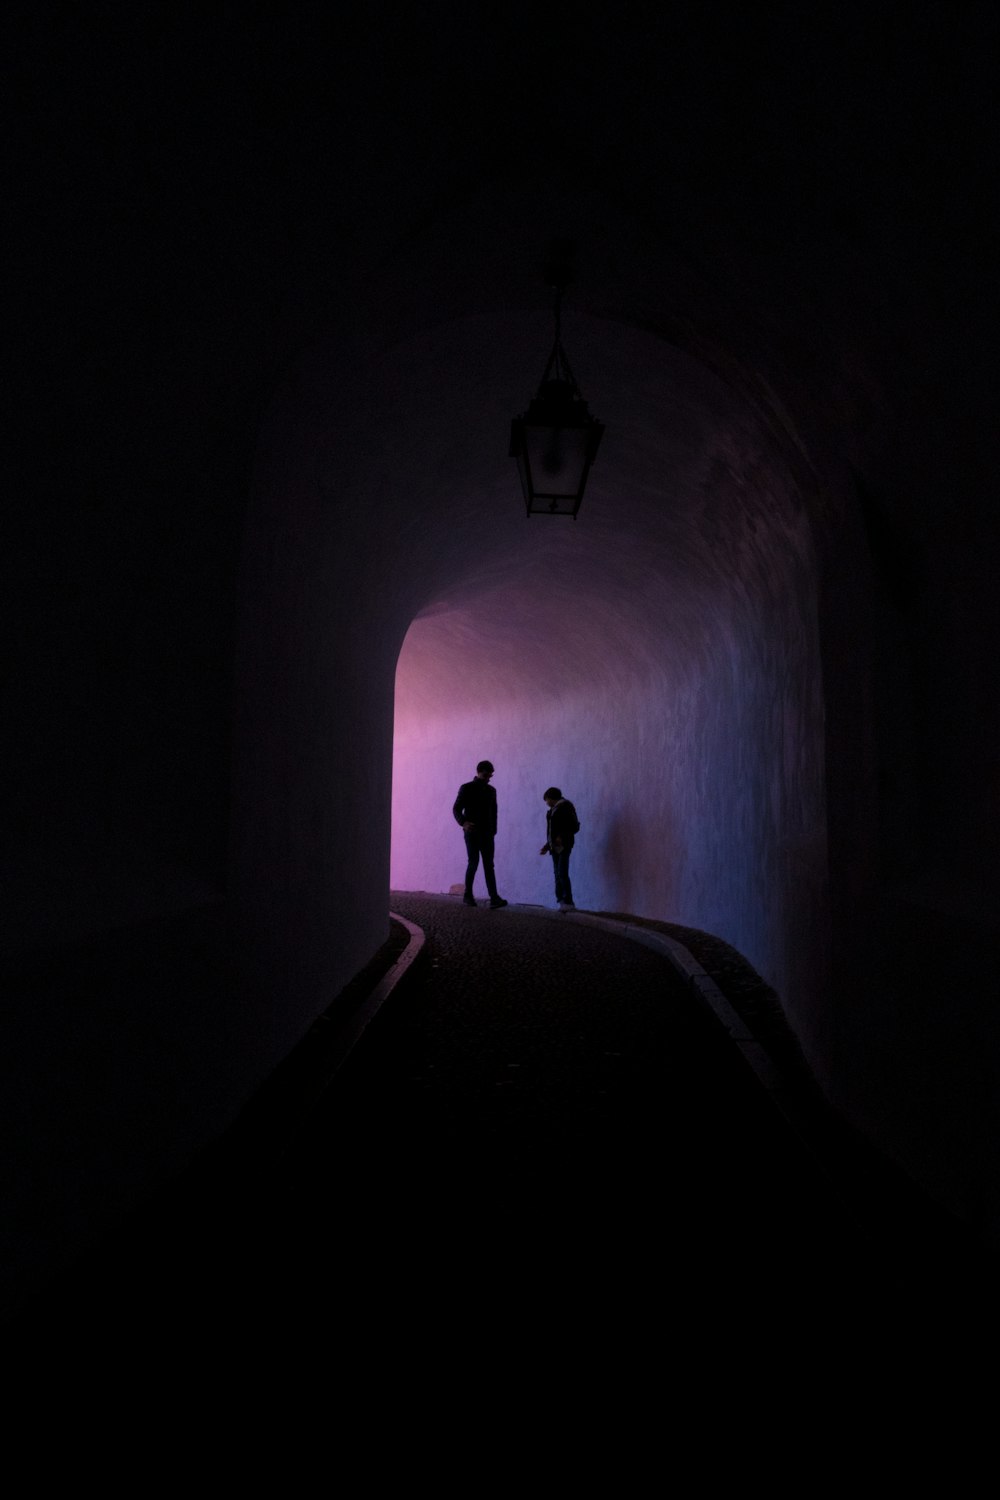 silhouette of two person standing inside tunnel